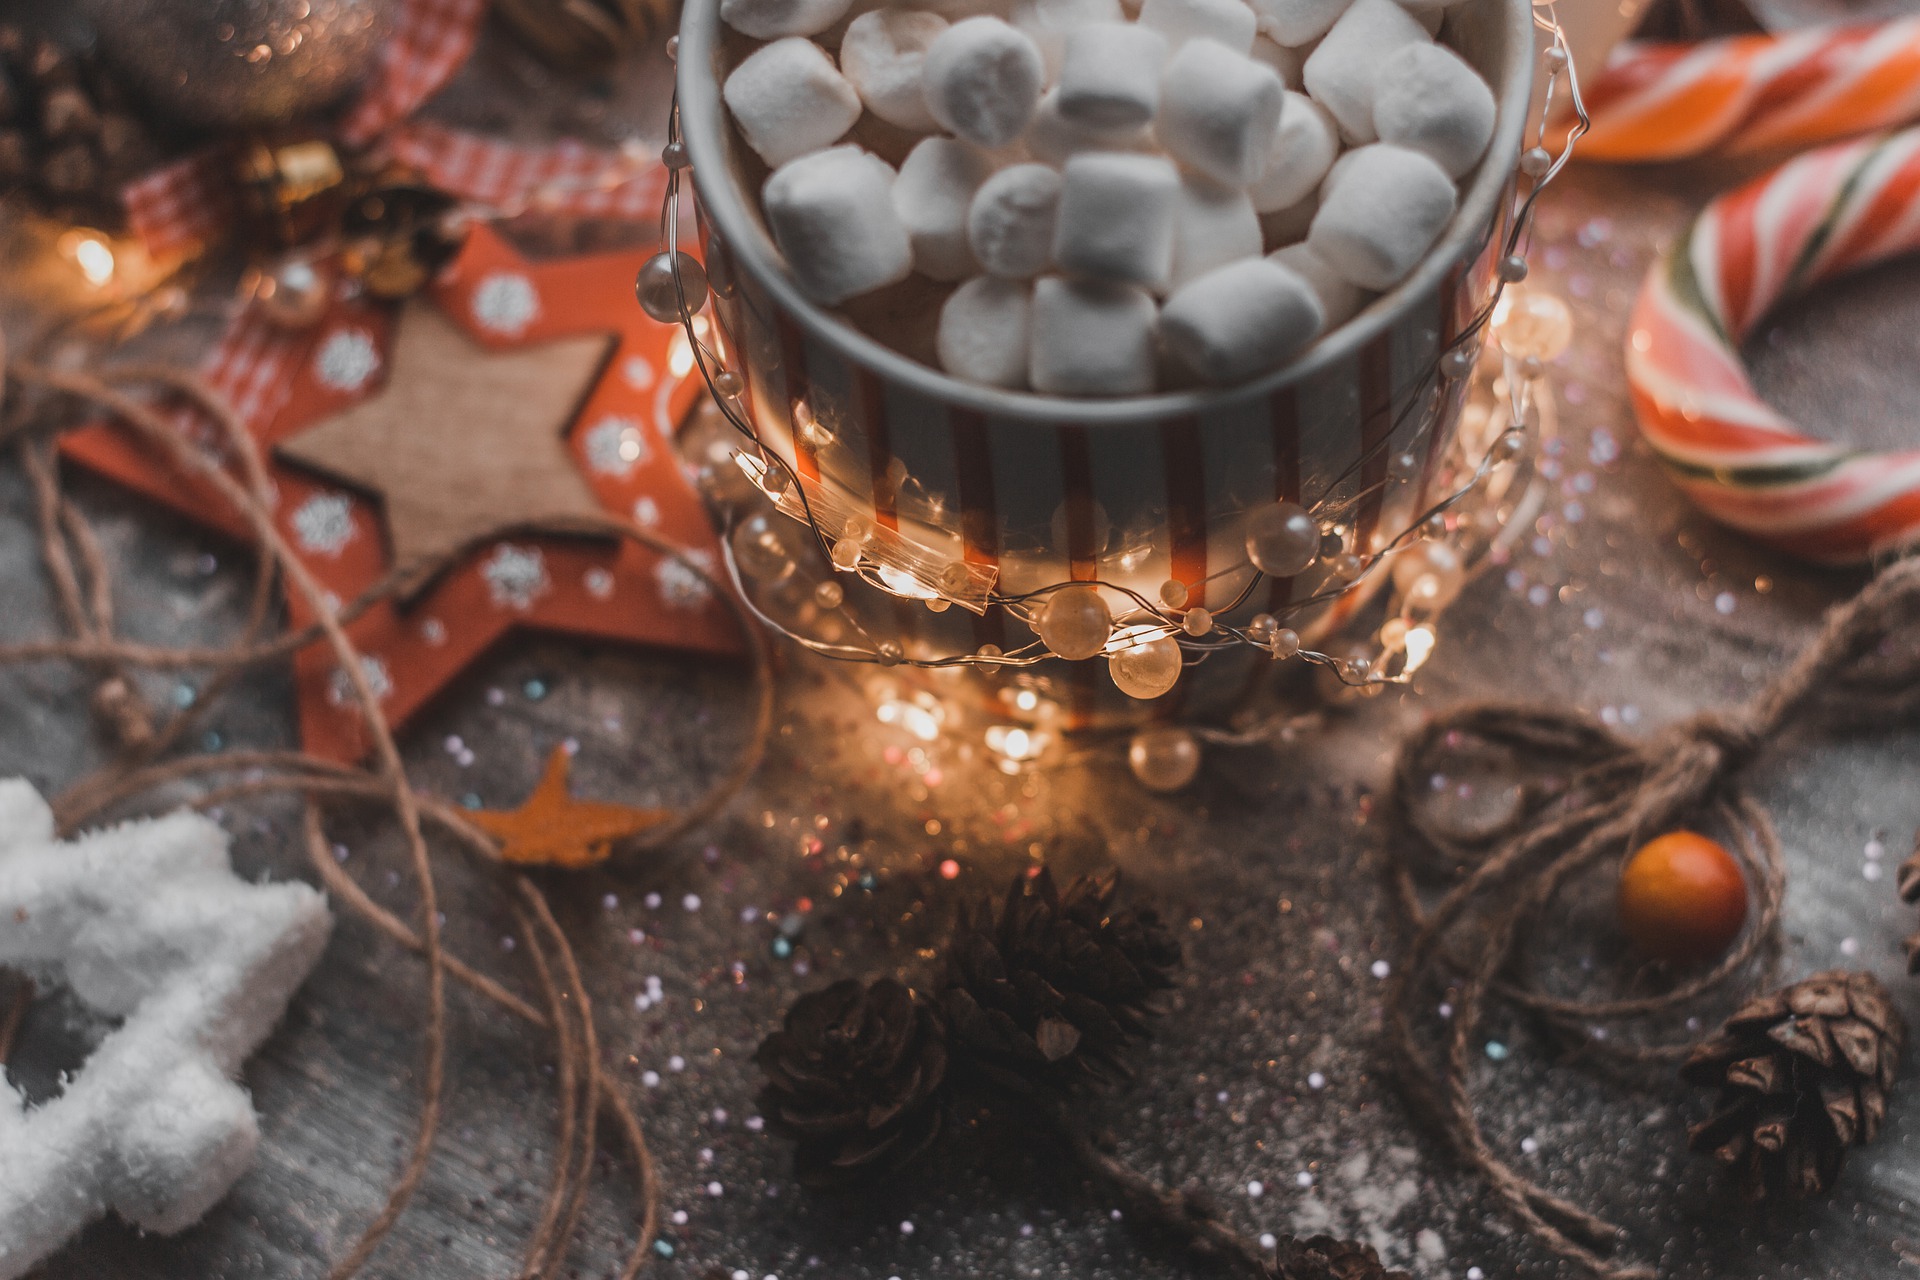 10 TIPS TO MAKE YOUR HOME COZY FOR THE HOLIDAYS Cover Photo